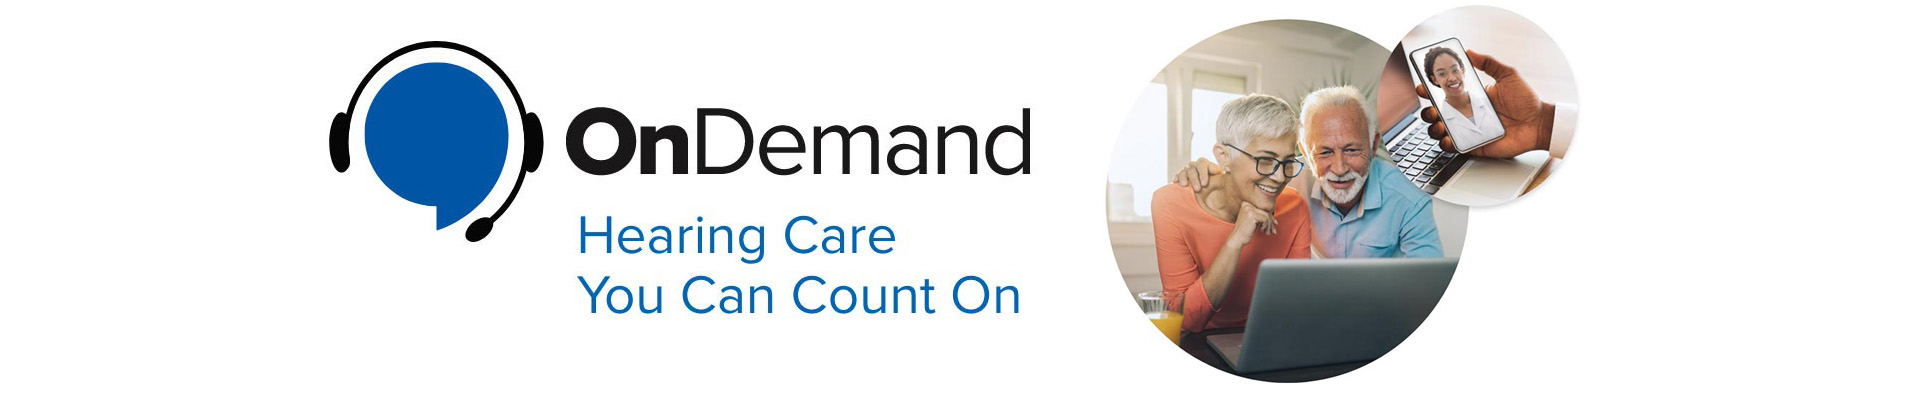 HearingLife OnDemand - Hearing Care You Can Count On